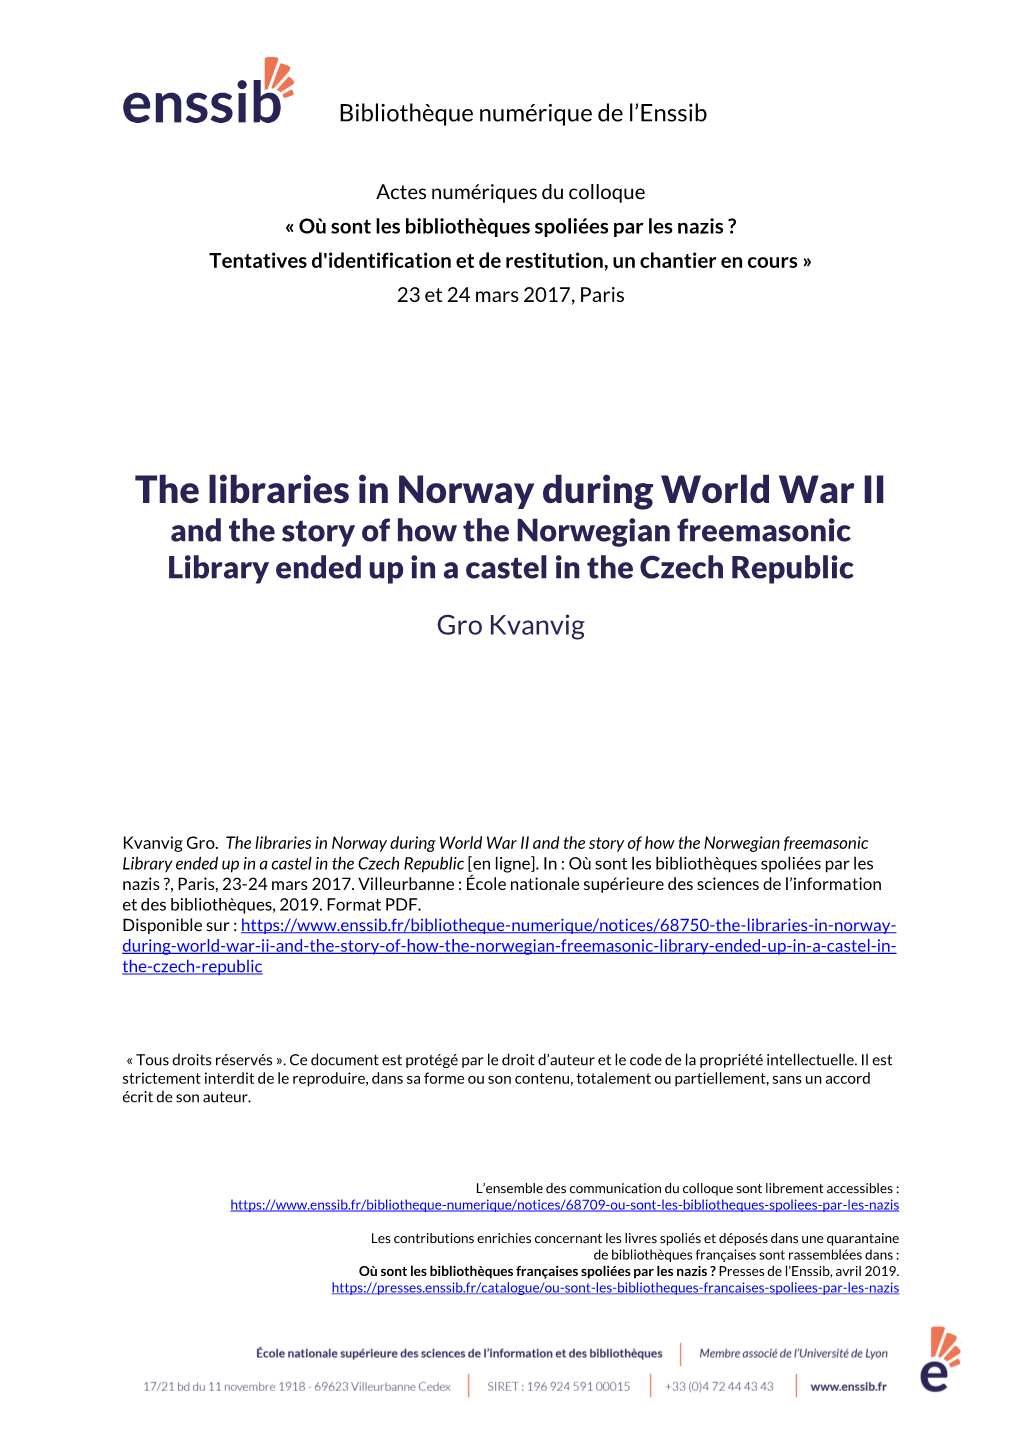 The Libraries in Norway During World War II and the Story of How the Norwegian Freemasonic Library Ended up in a Castel in the Czech Republic